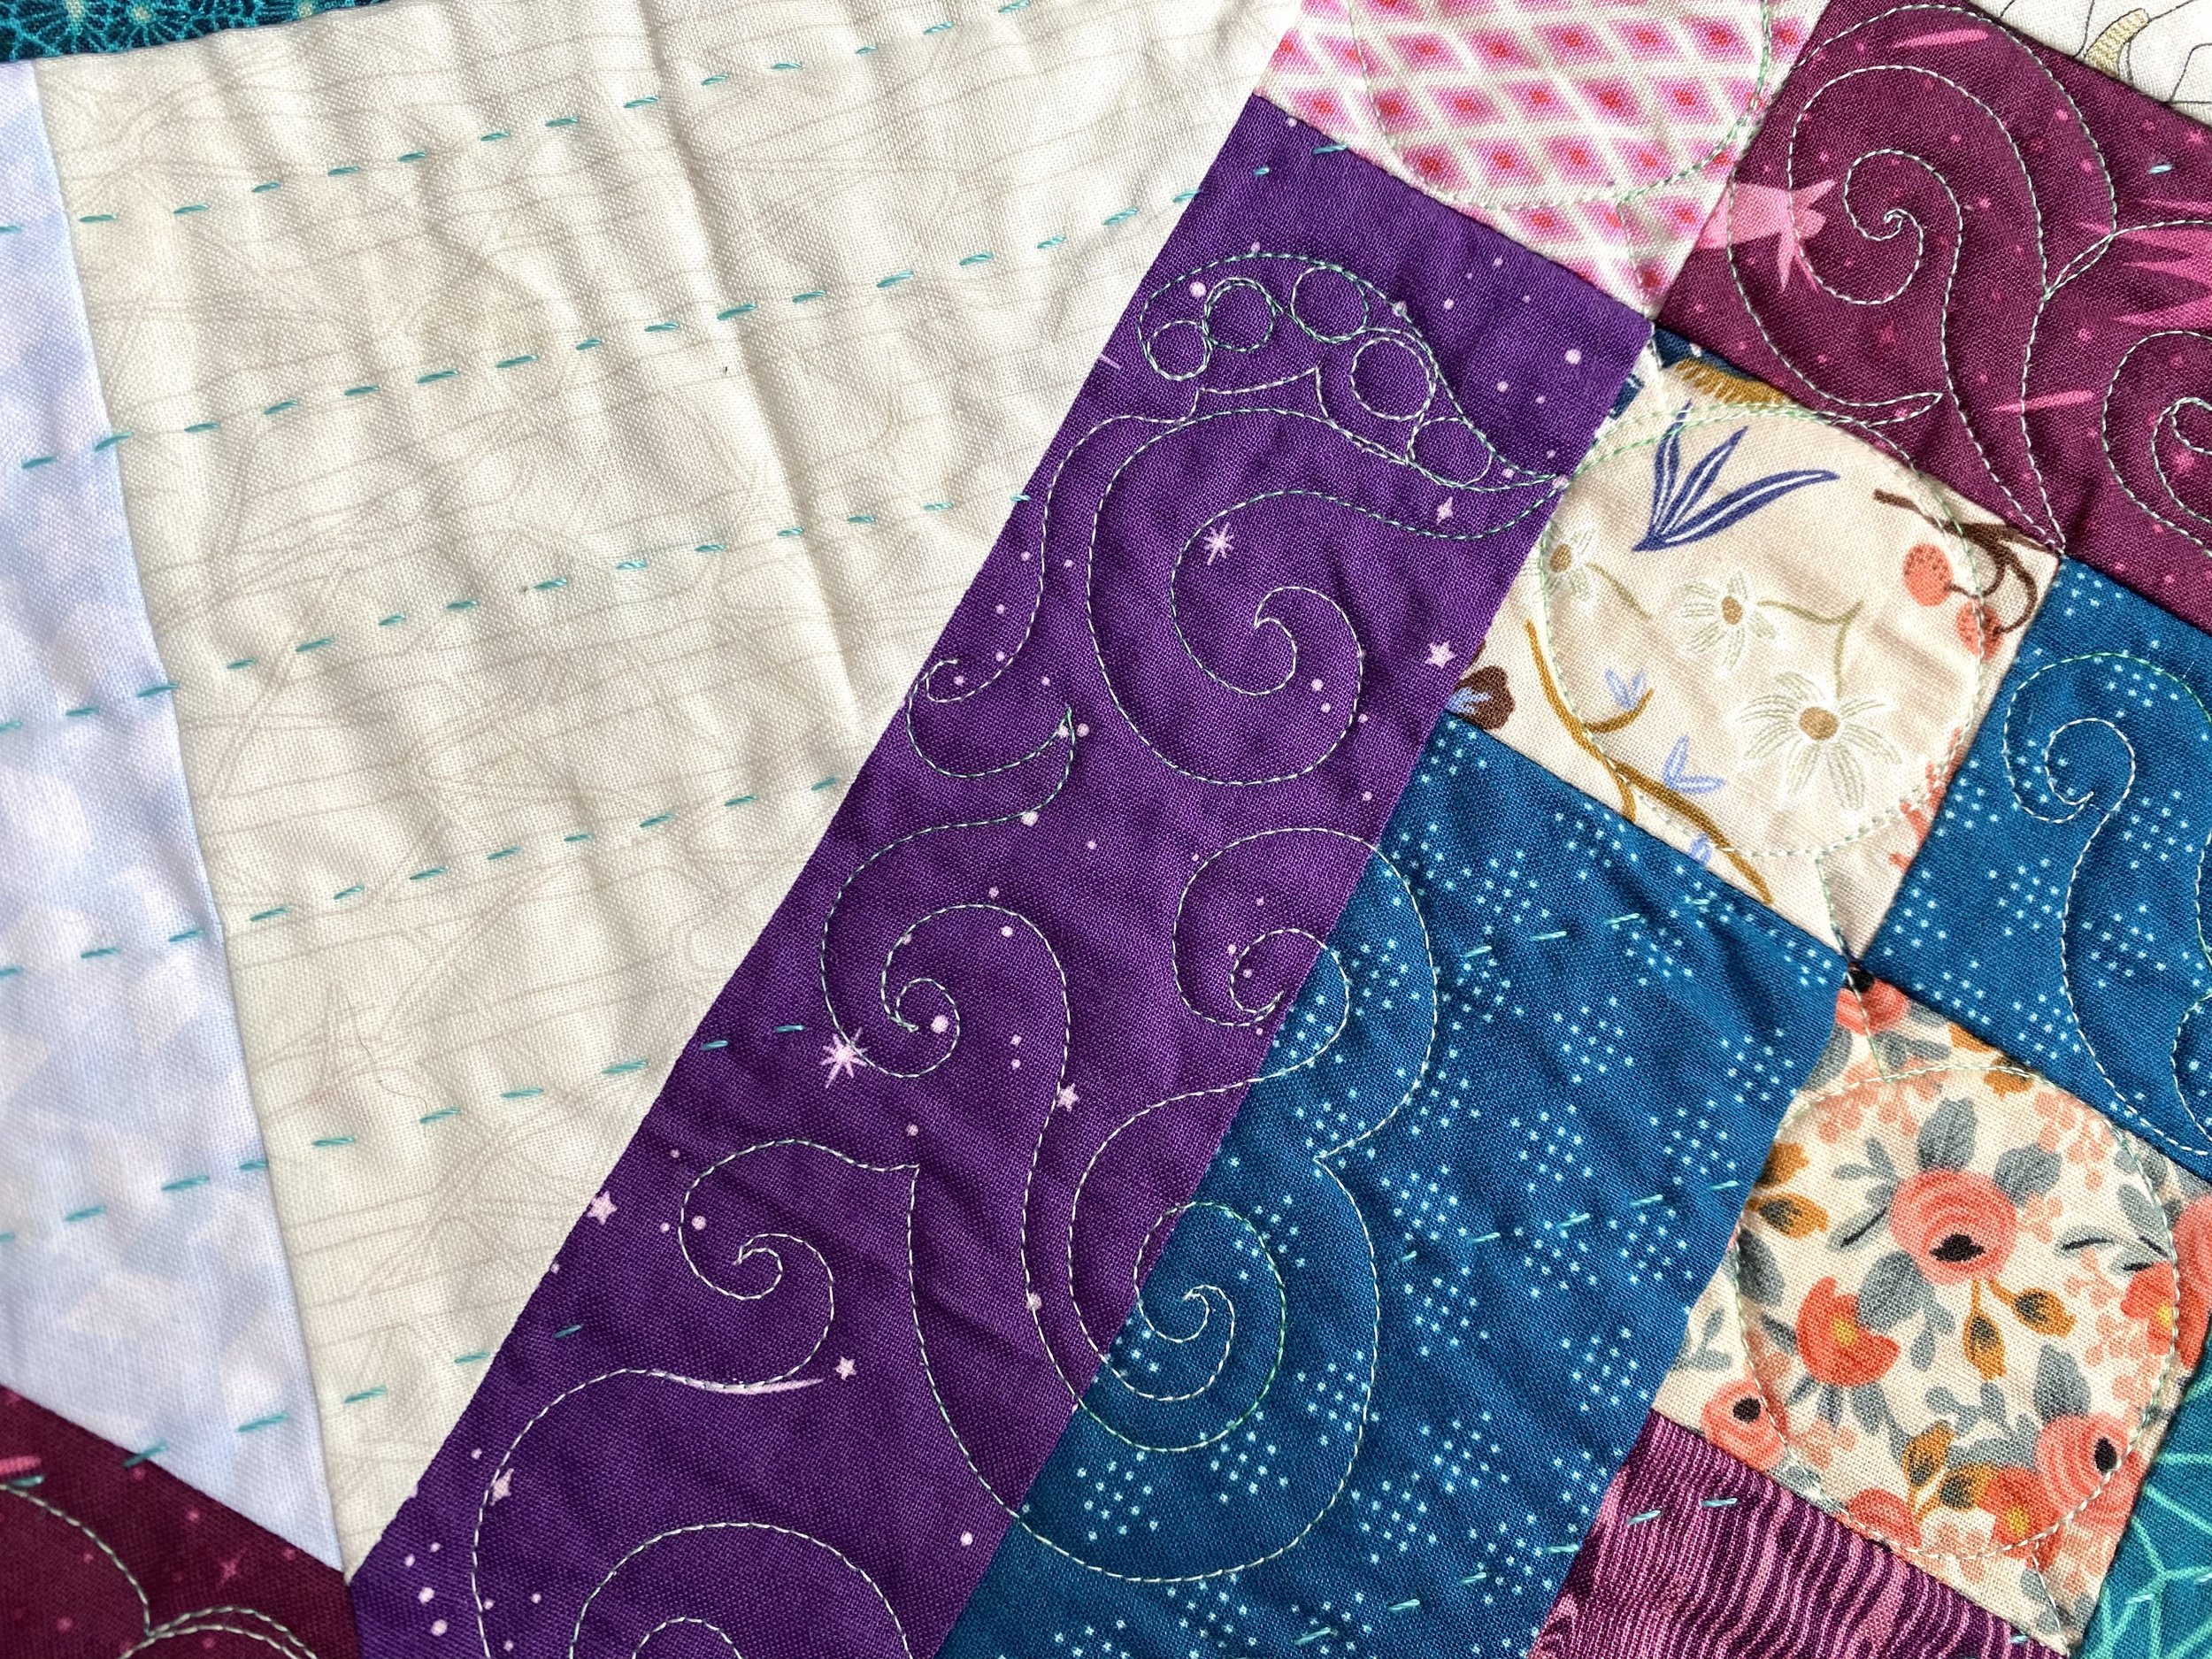 Hand and Machine: Quilting that Complements Itself. — Exhausted Octopus